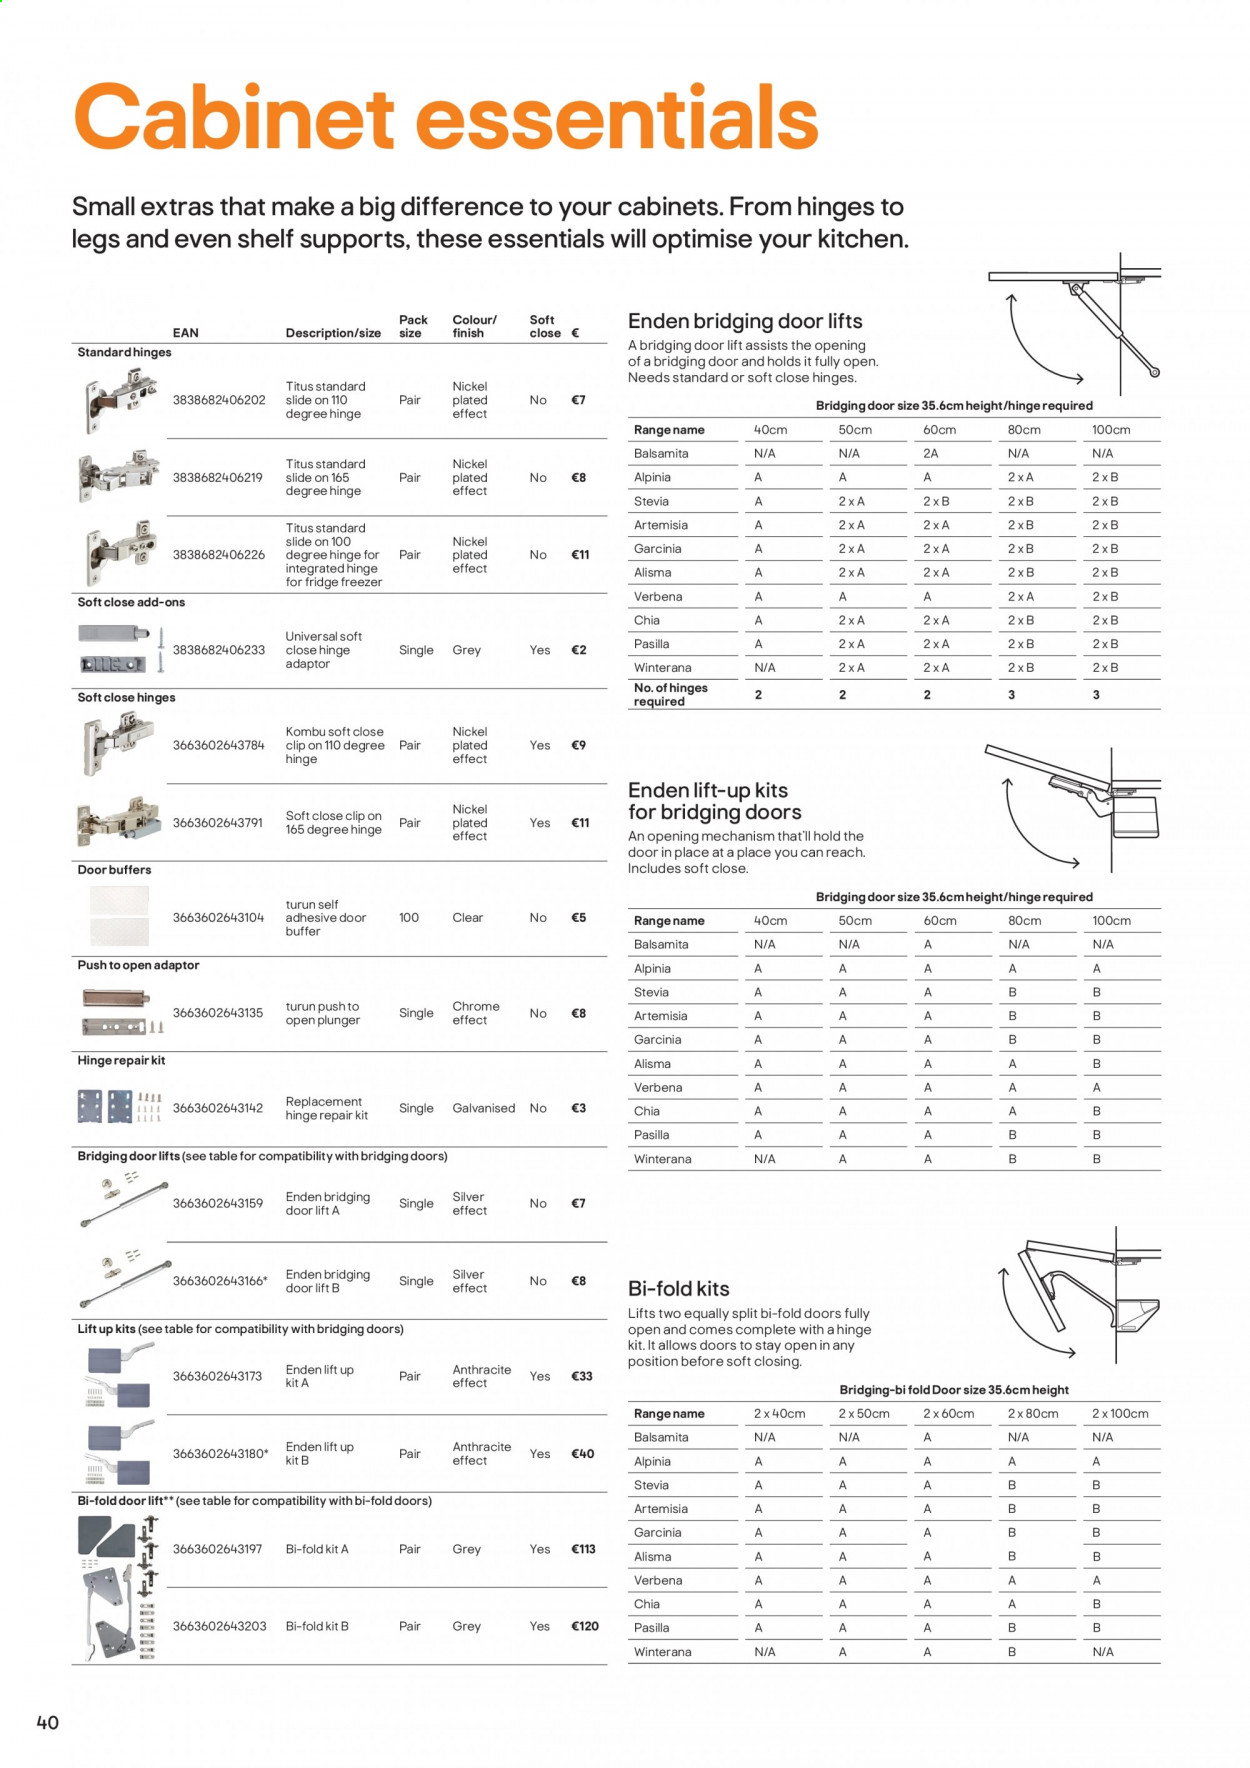 thumbnail - B&Q offer  - Sales products - cabinet, table, shelves. Page 40.